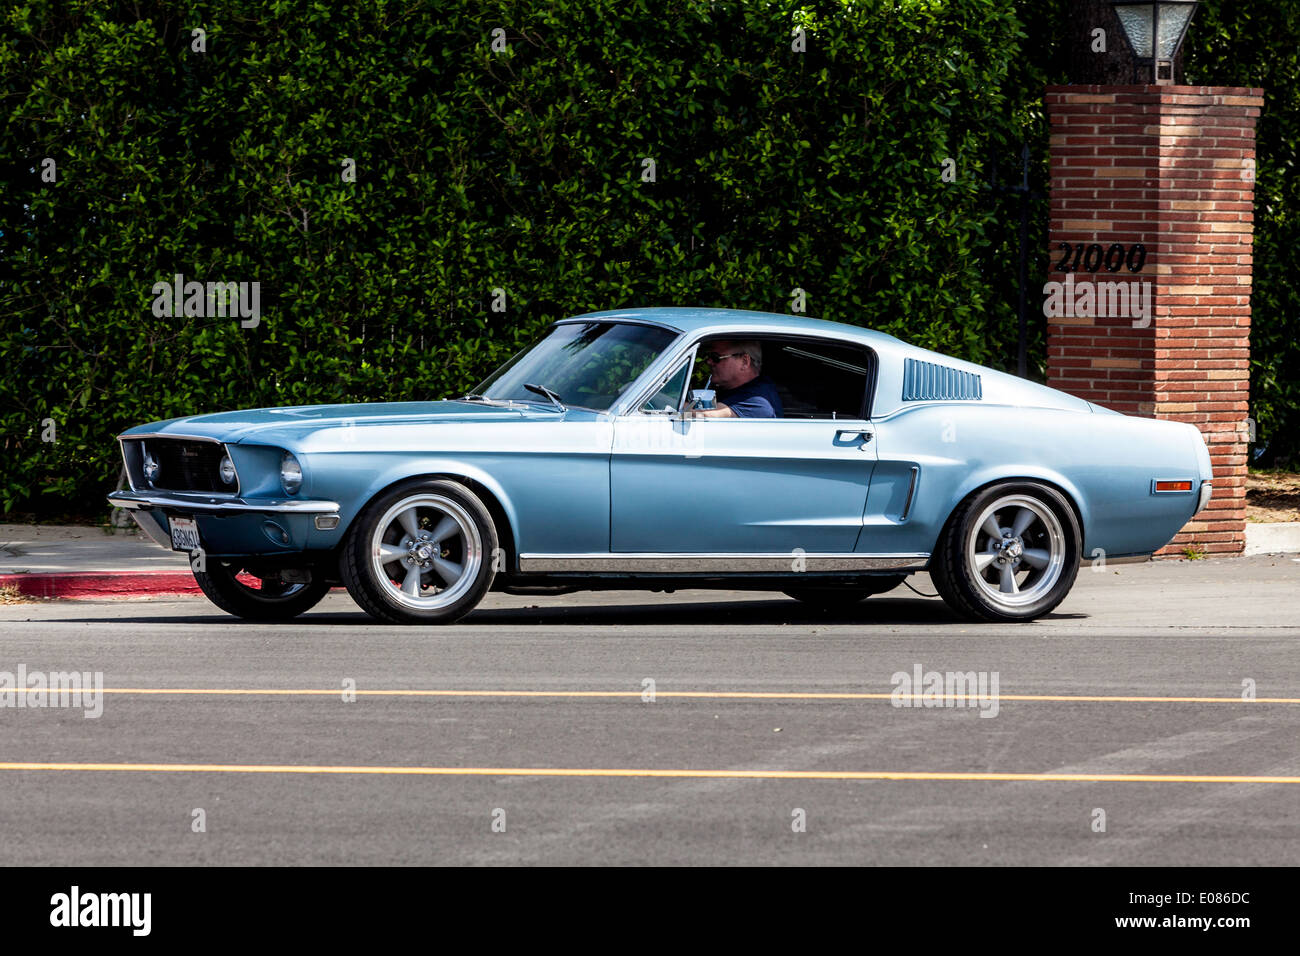 1968 Mustang Fastback Banque D'Images